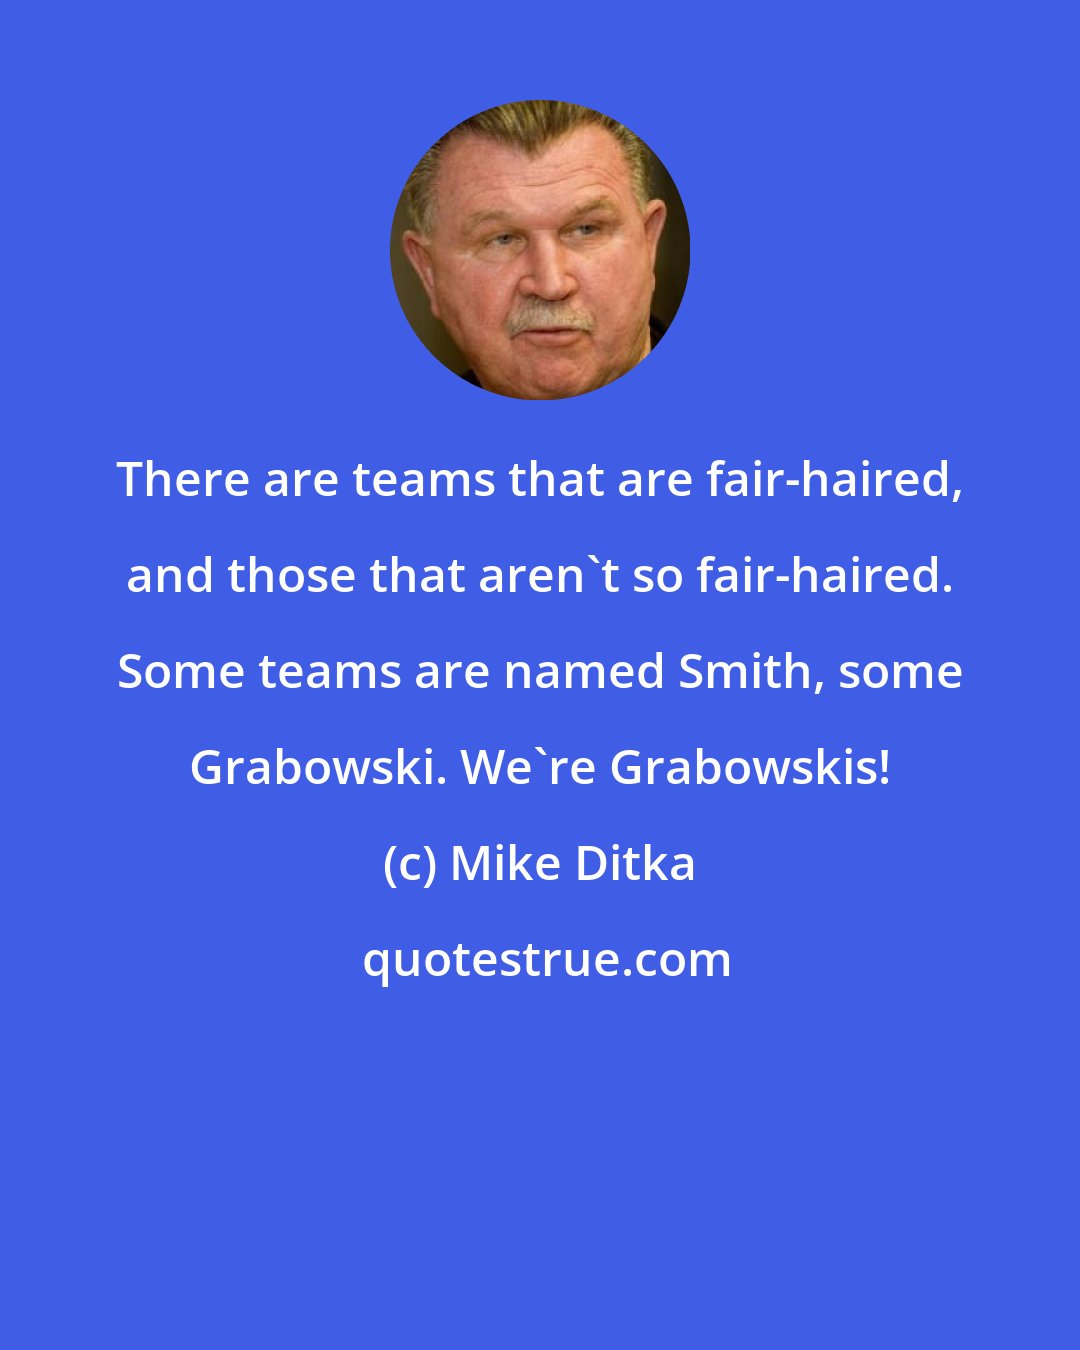 Mike Ditka: There are teams that are fair-haired, and those that aren't so fair-haired. Some teams are named Smith, some Grabowski. We're Grabowskis!